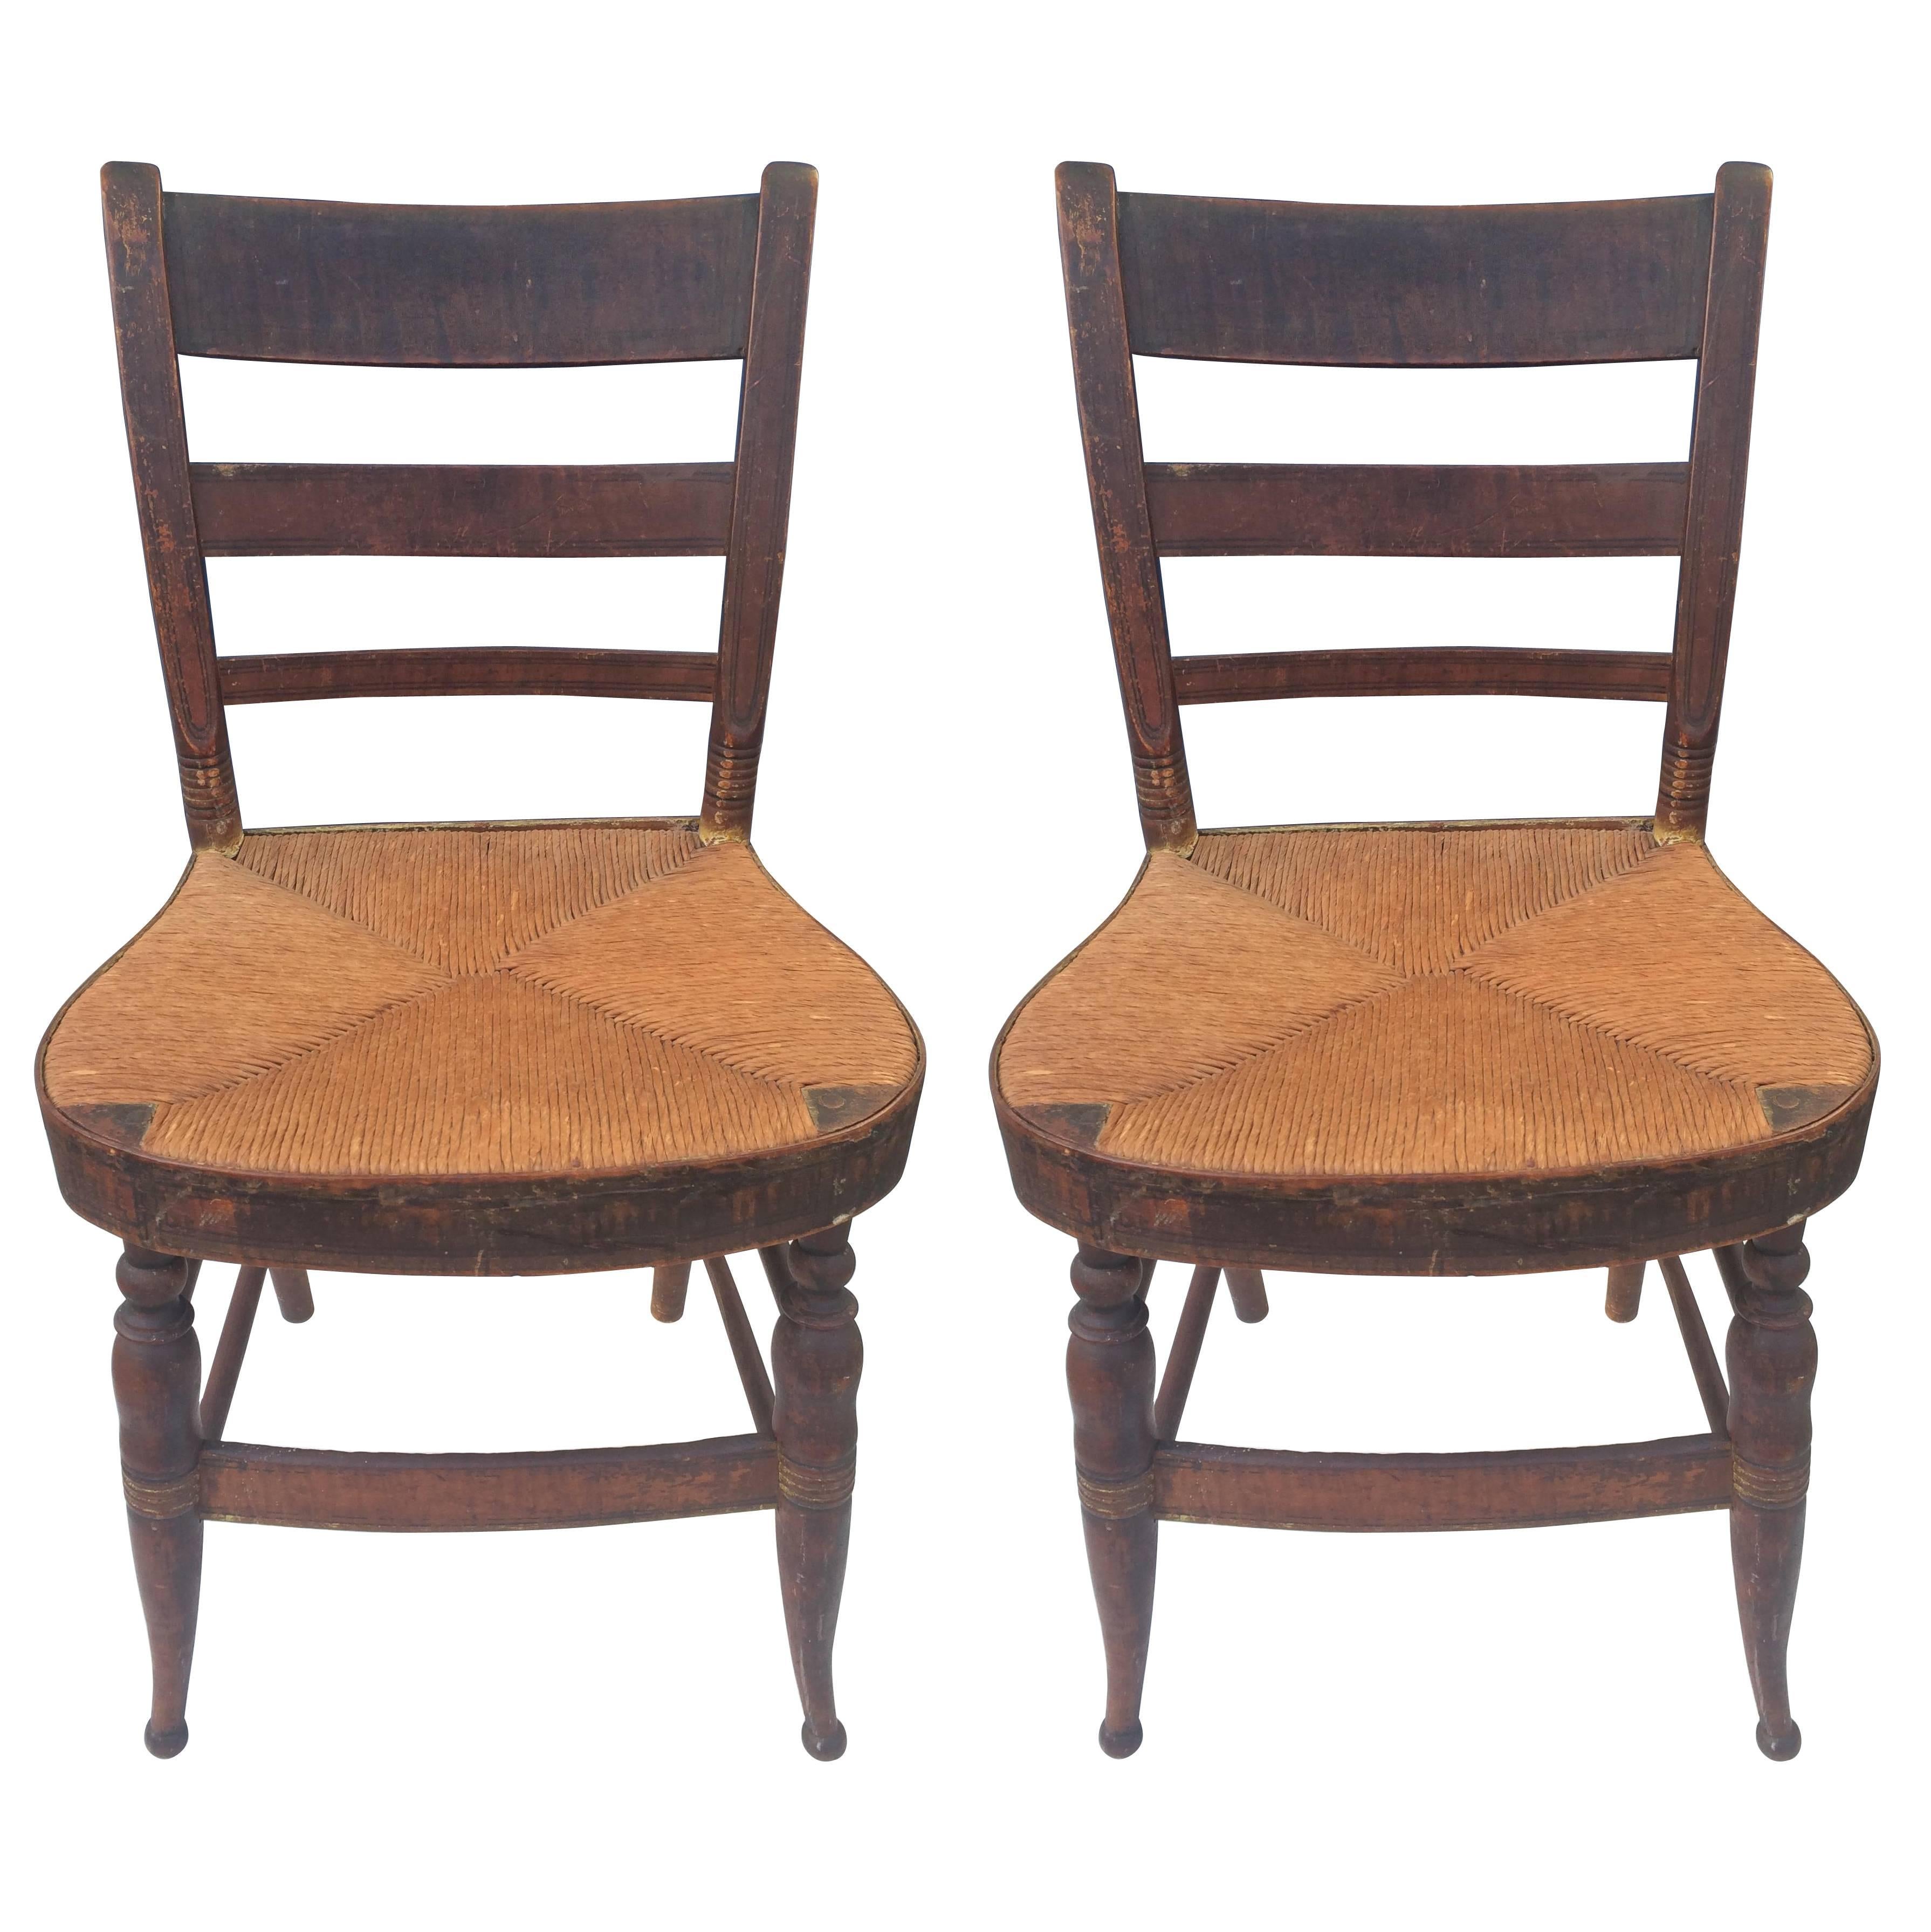 Pair of Balloon Seat Side Chairs, New York c.1820